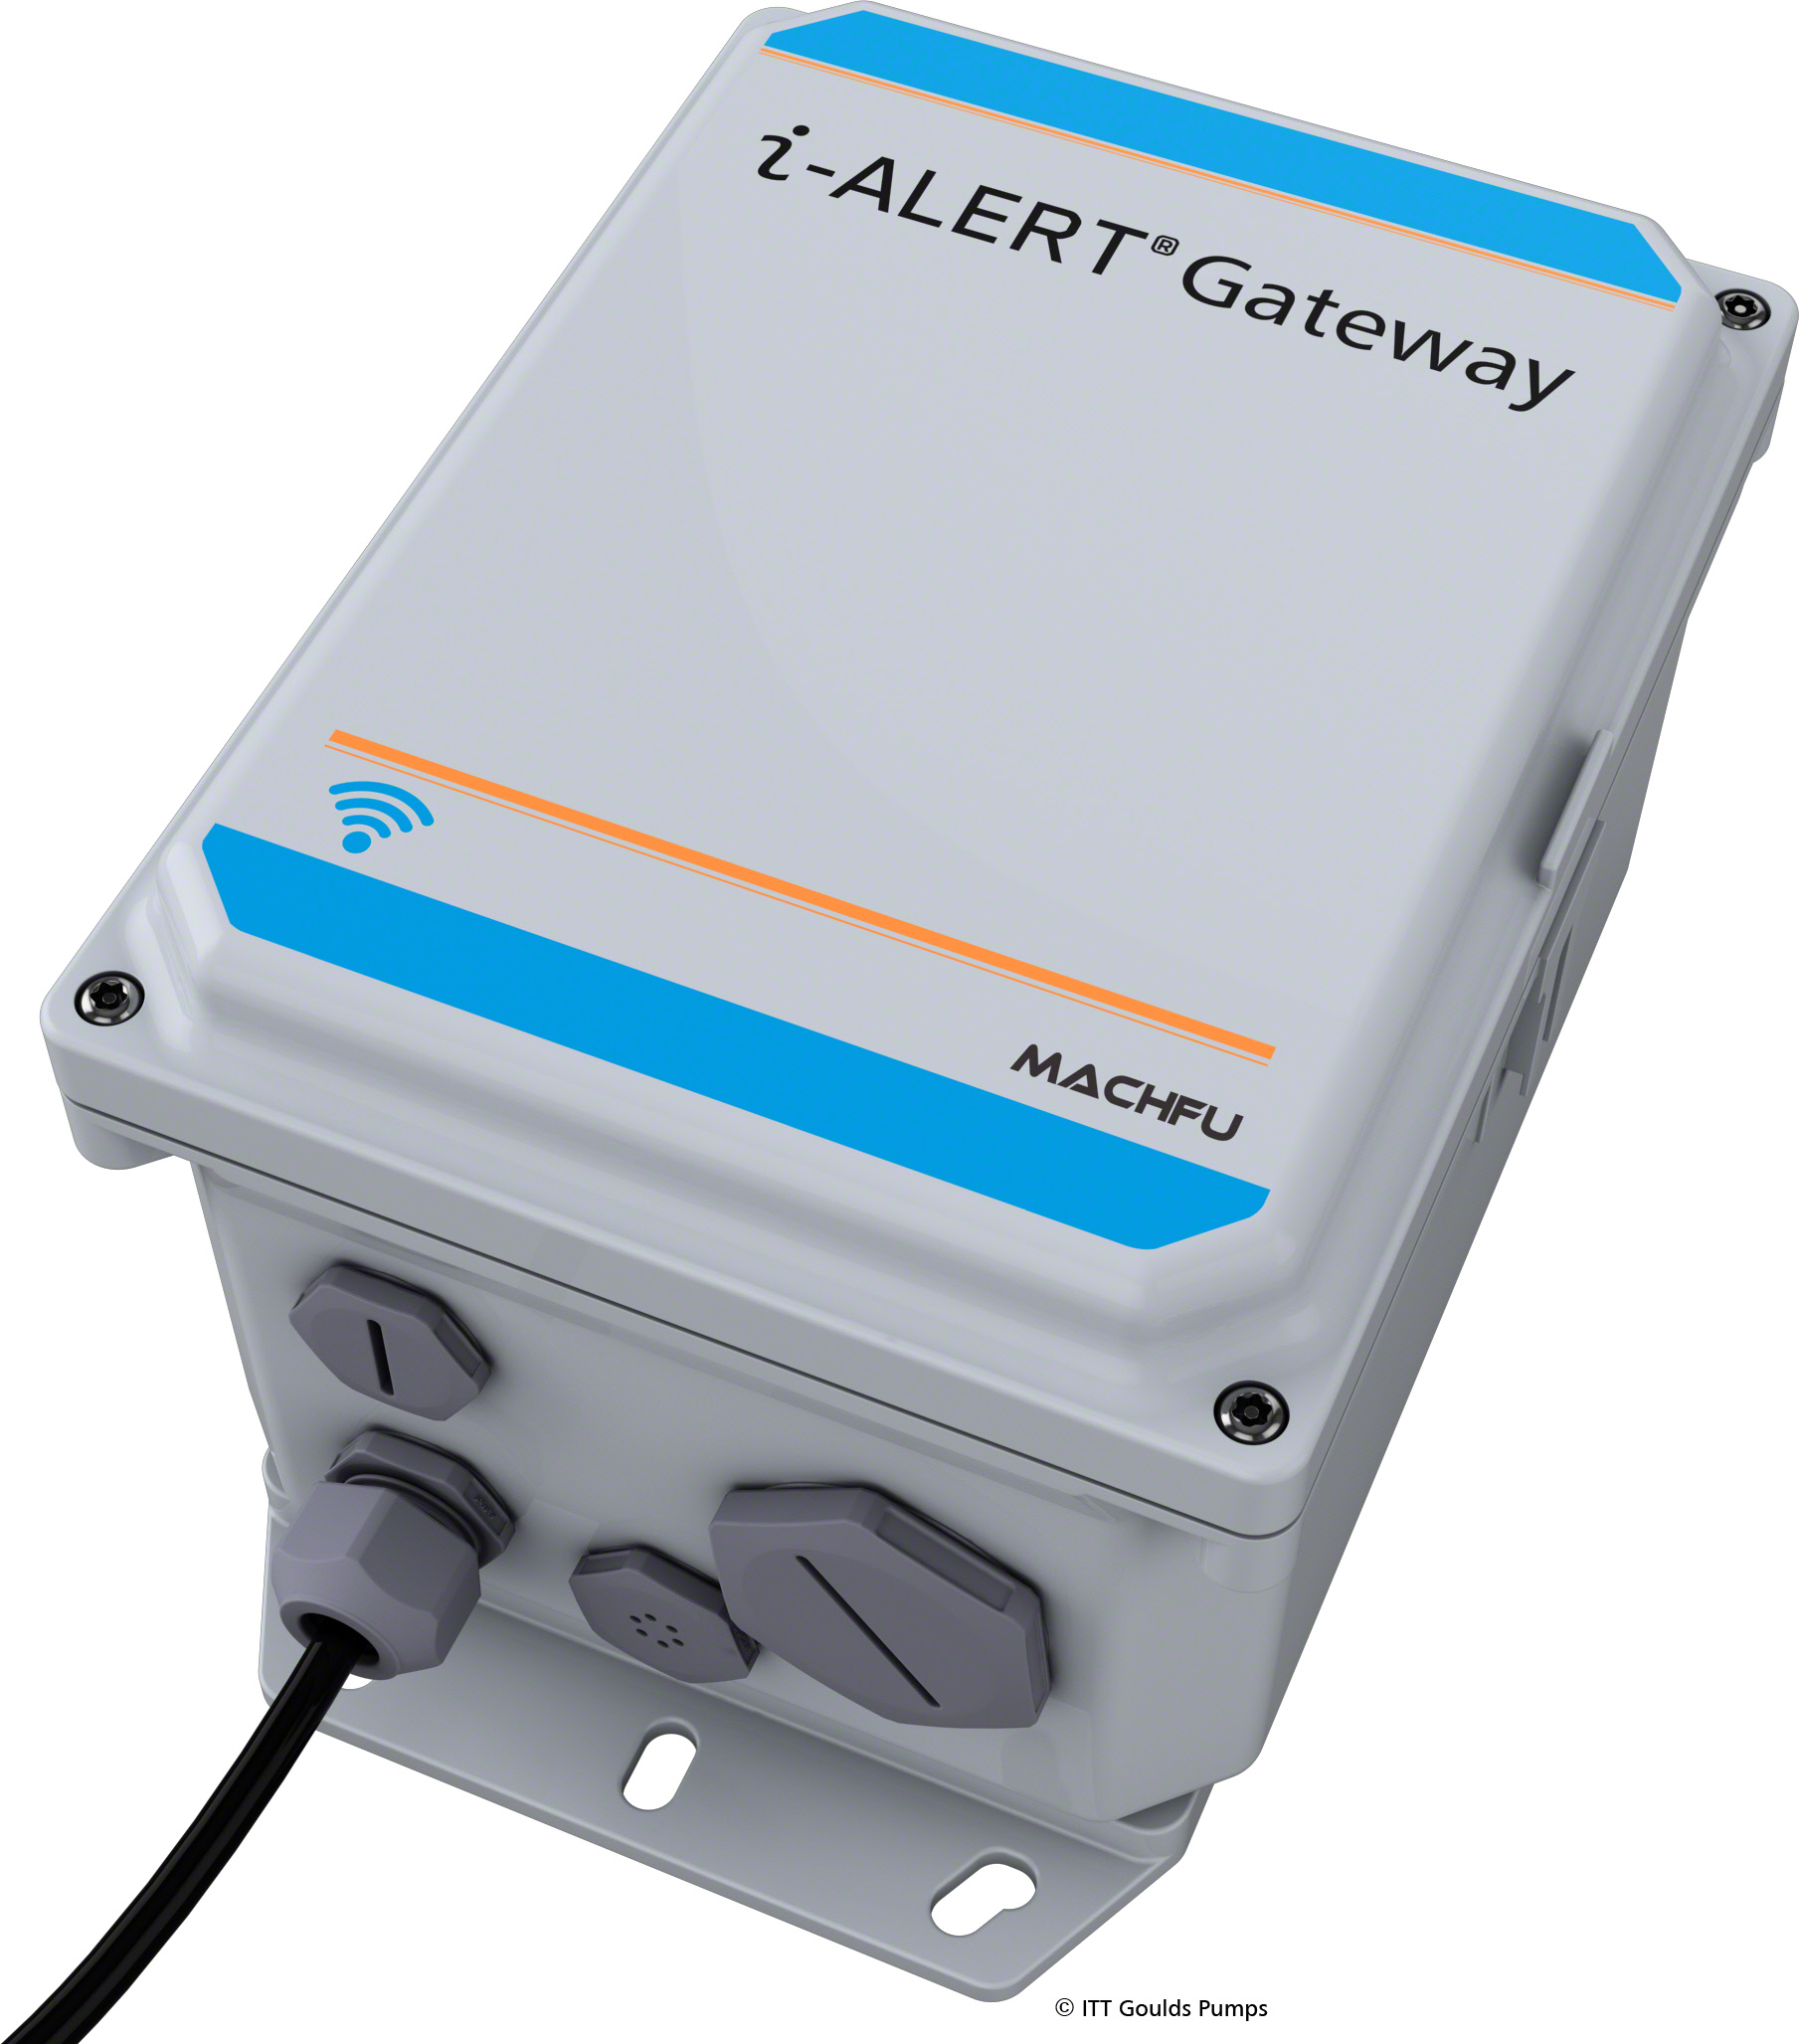 ITT's new i-ALERT Gateway which offers continuous machine monitoring with wireless reporting will be on display.